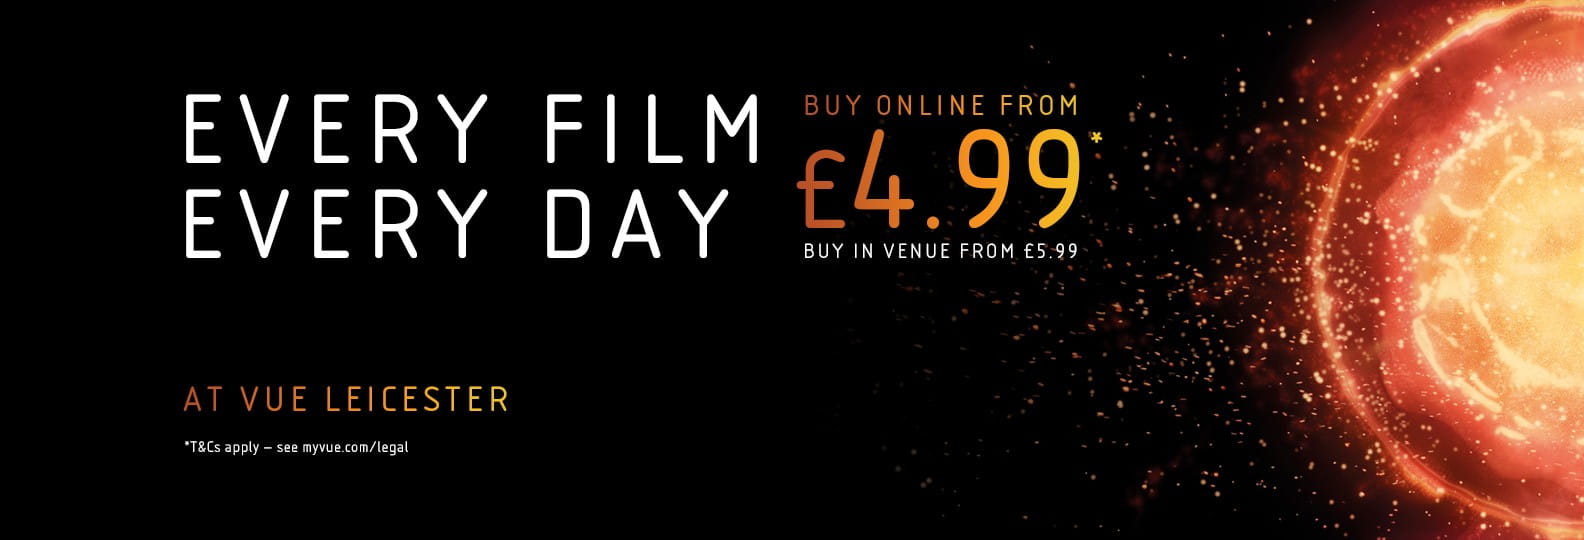 Every Day, Every Film from £4.99 at Vue Leicester